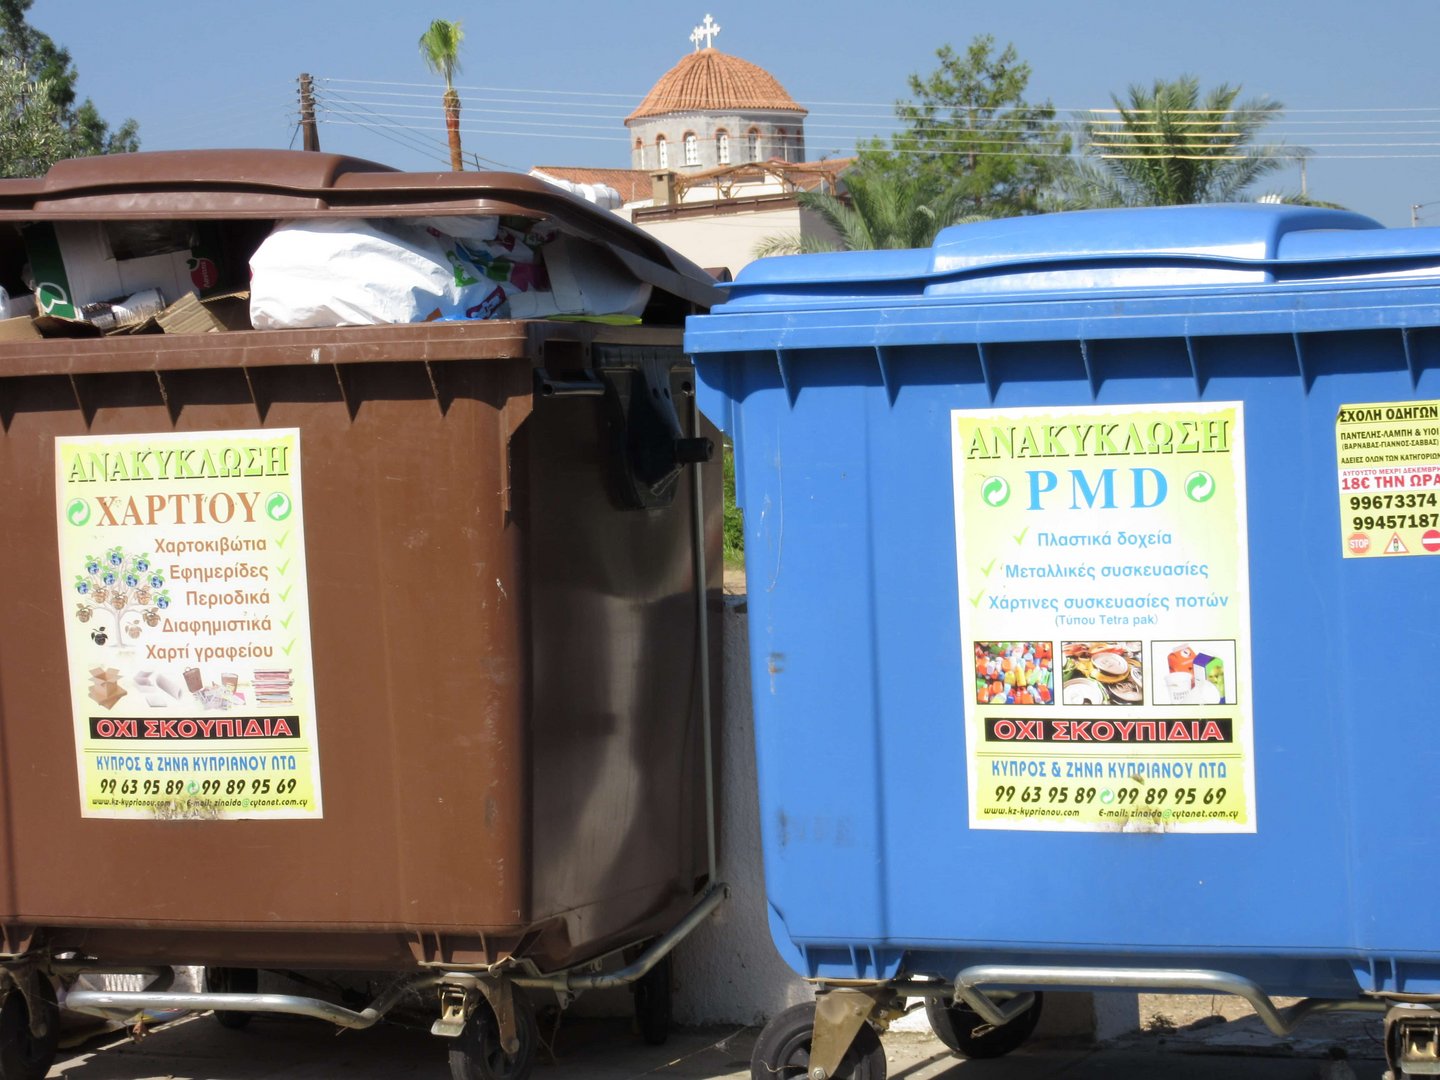 image Cyprus maintains above-average recycling rate according to report